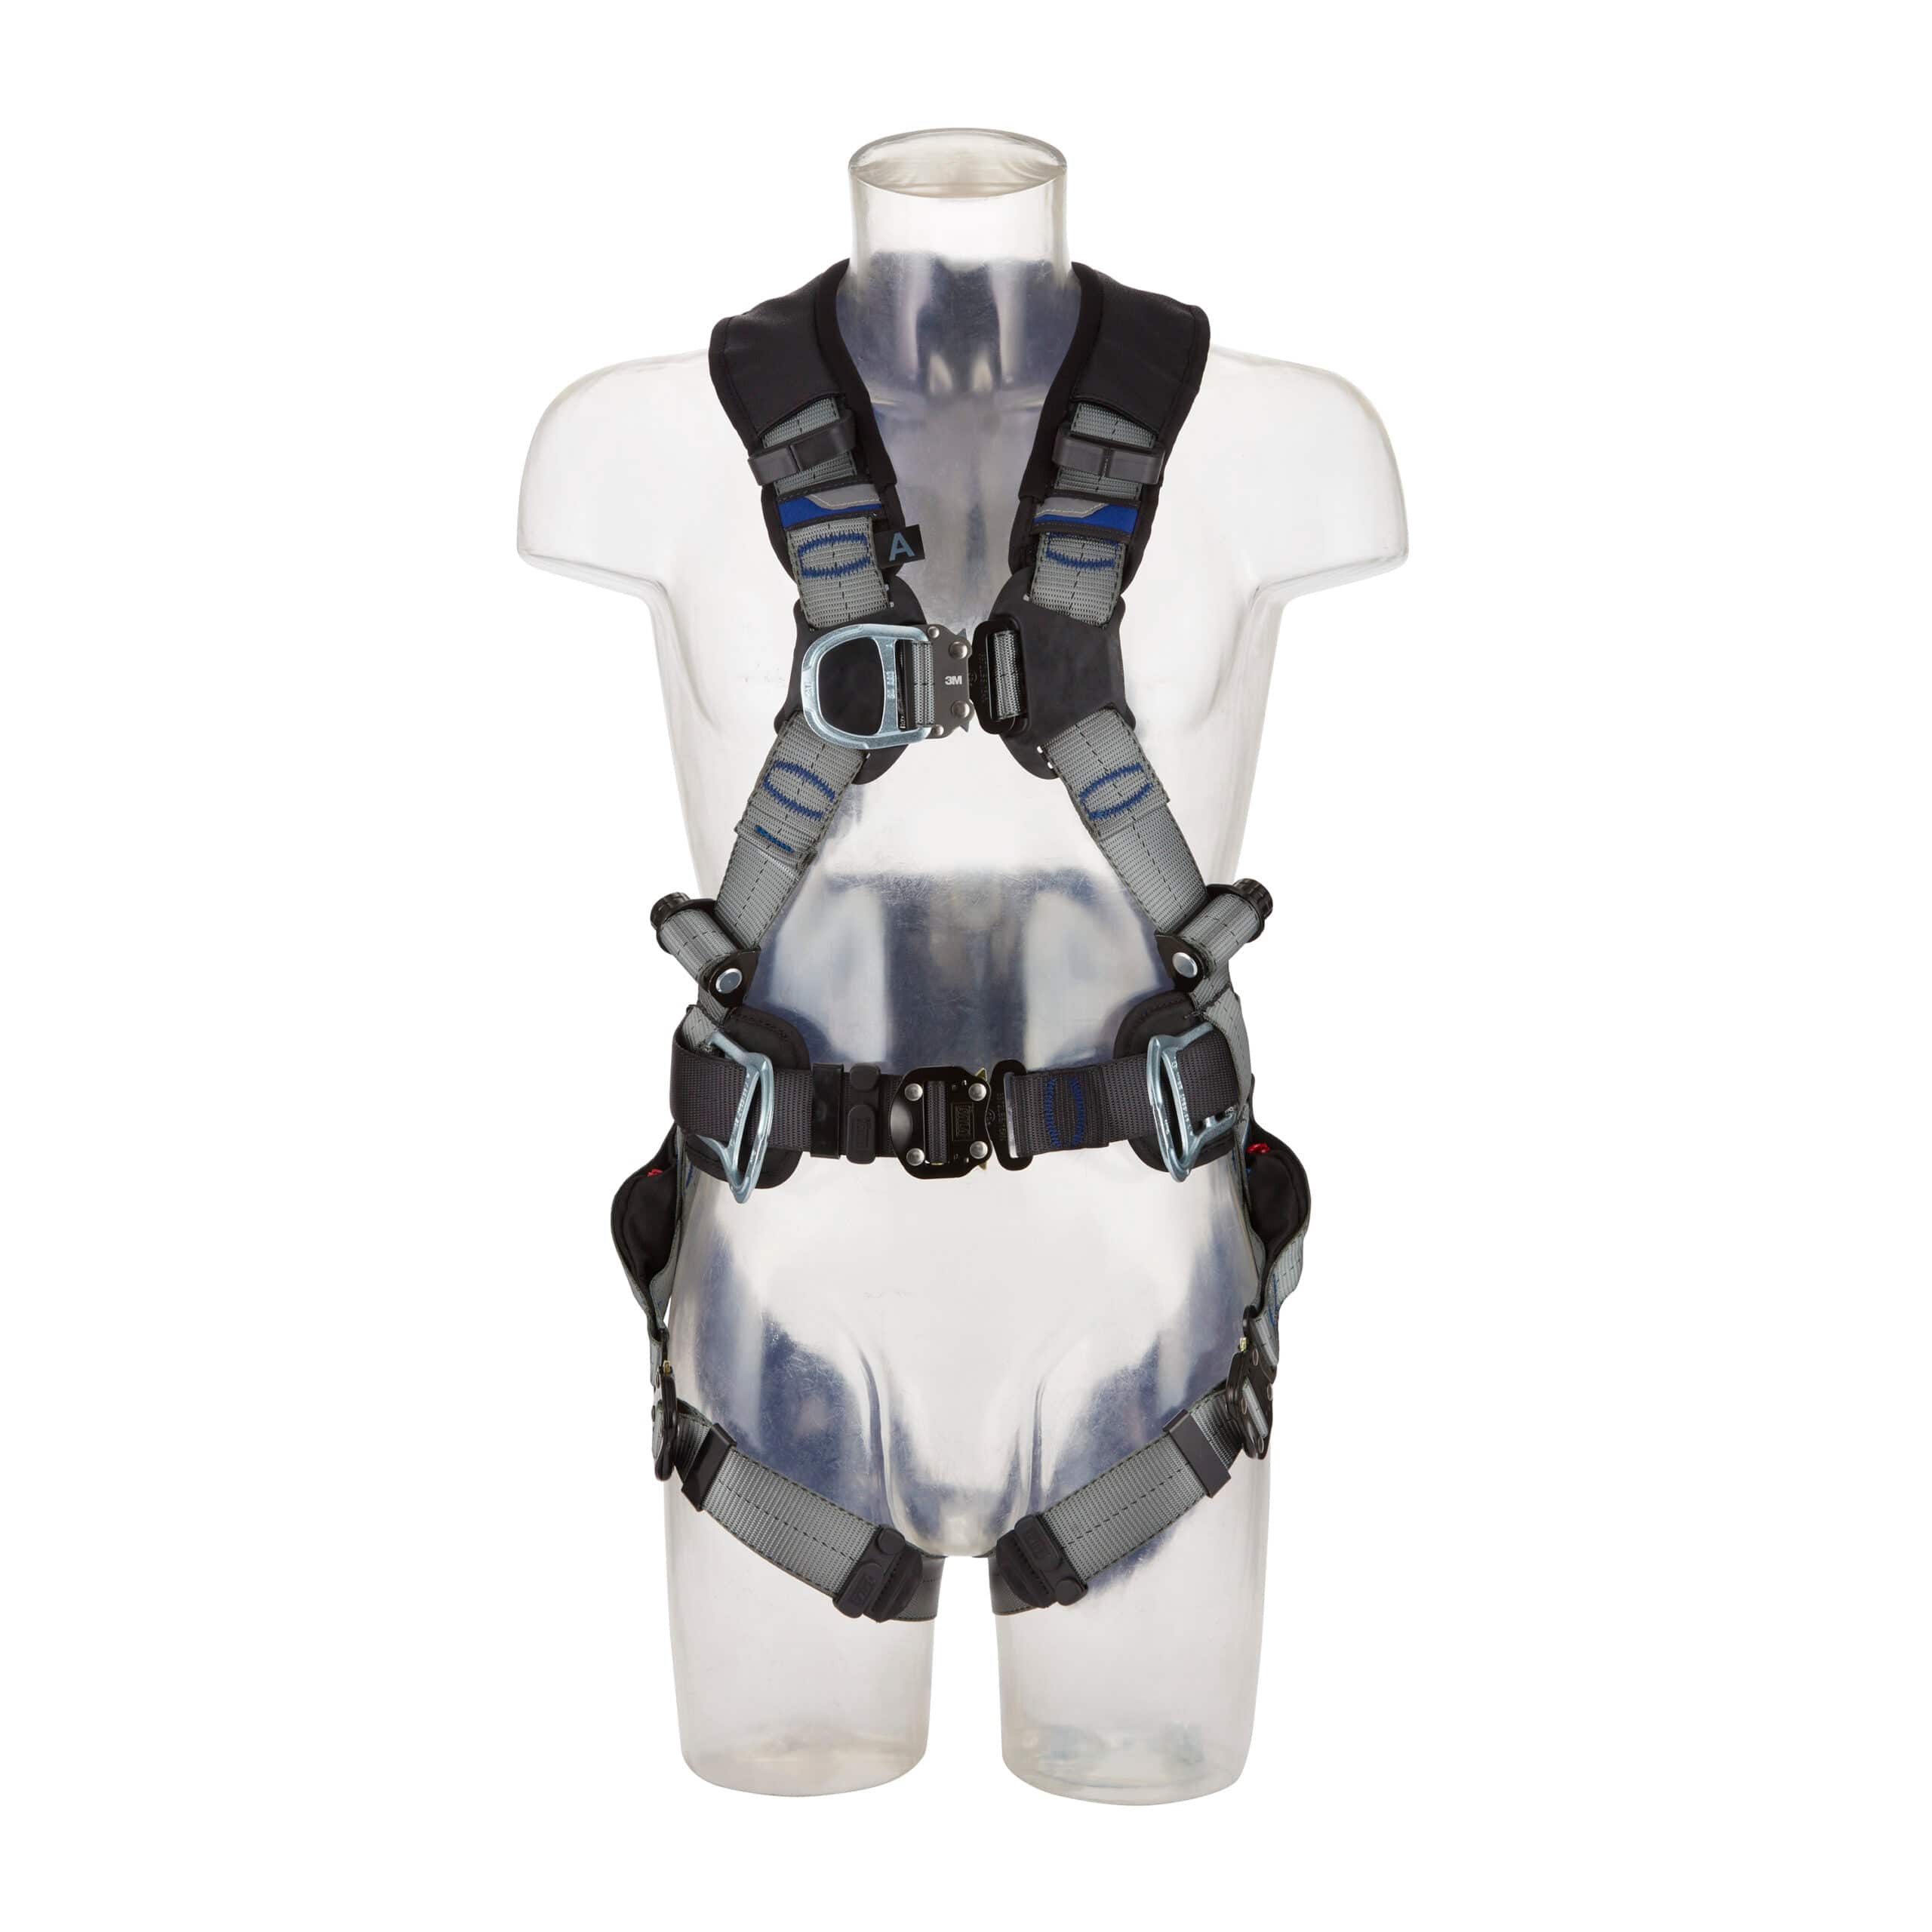 3M DBI SALA ExoFit XE100 Comfort Positioning Safety Harness - SecureHeights